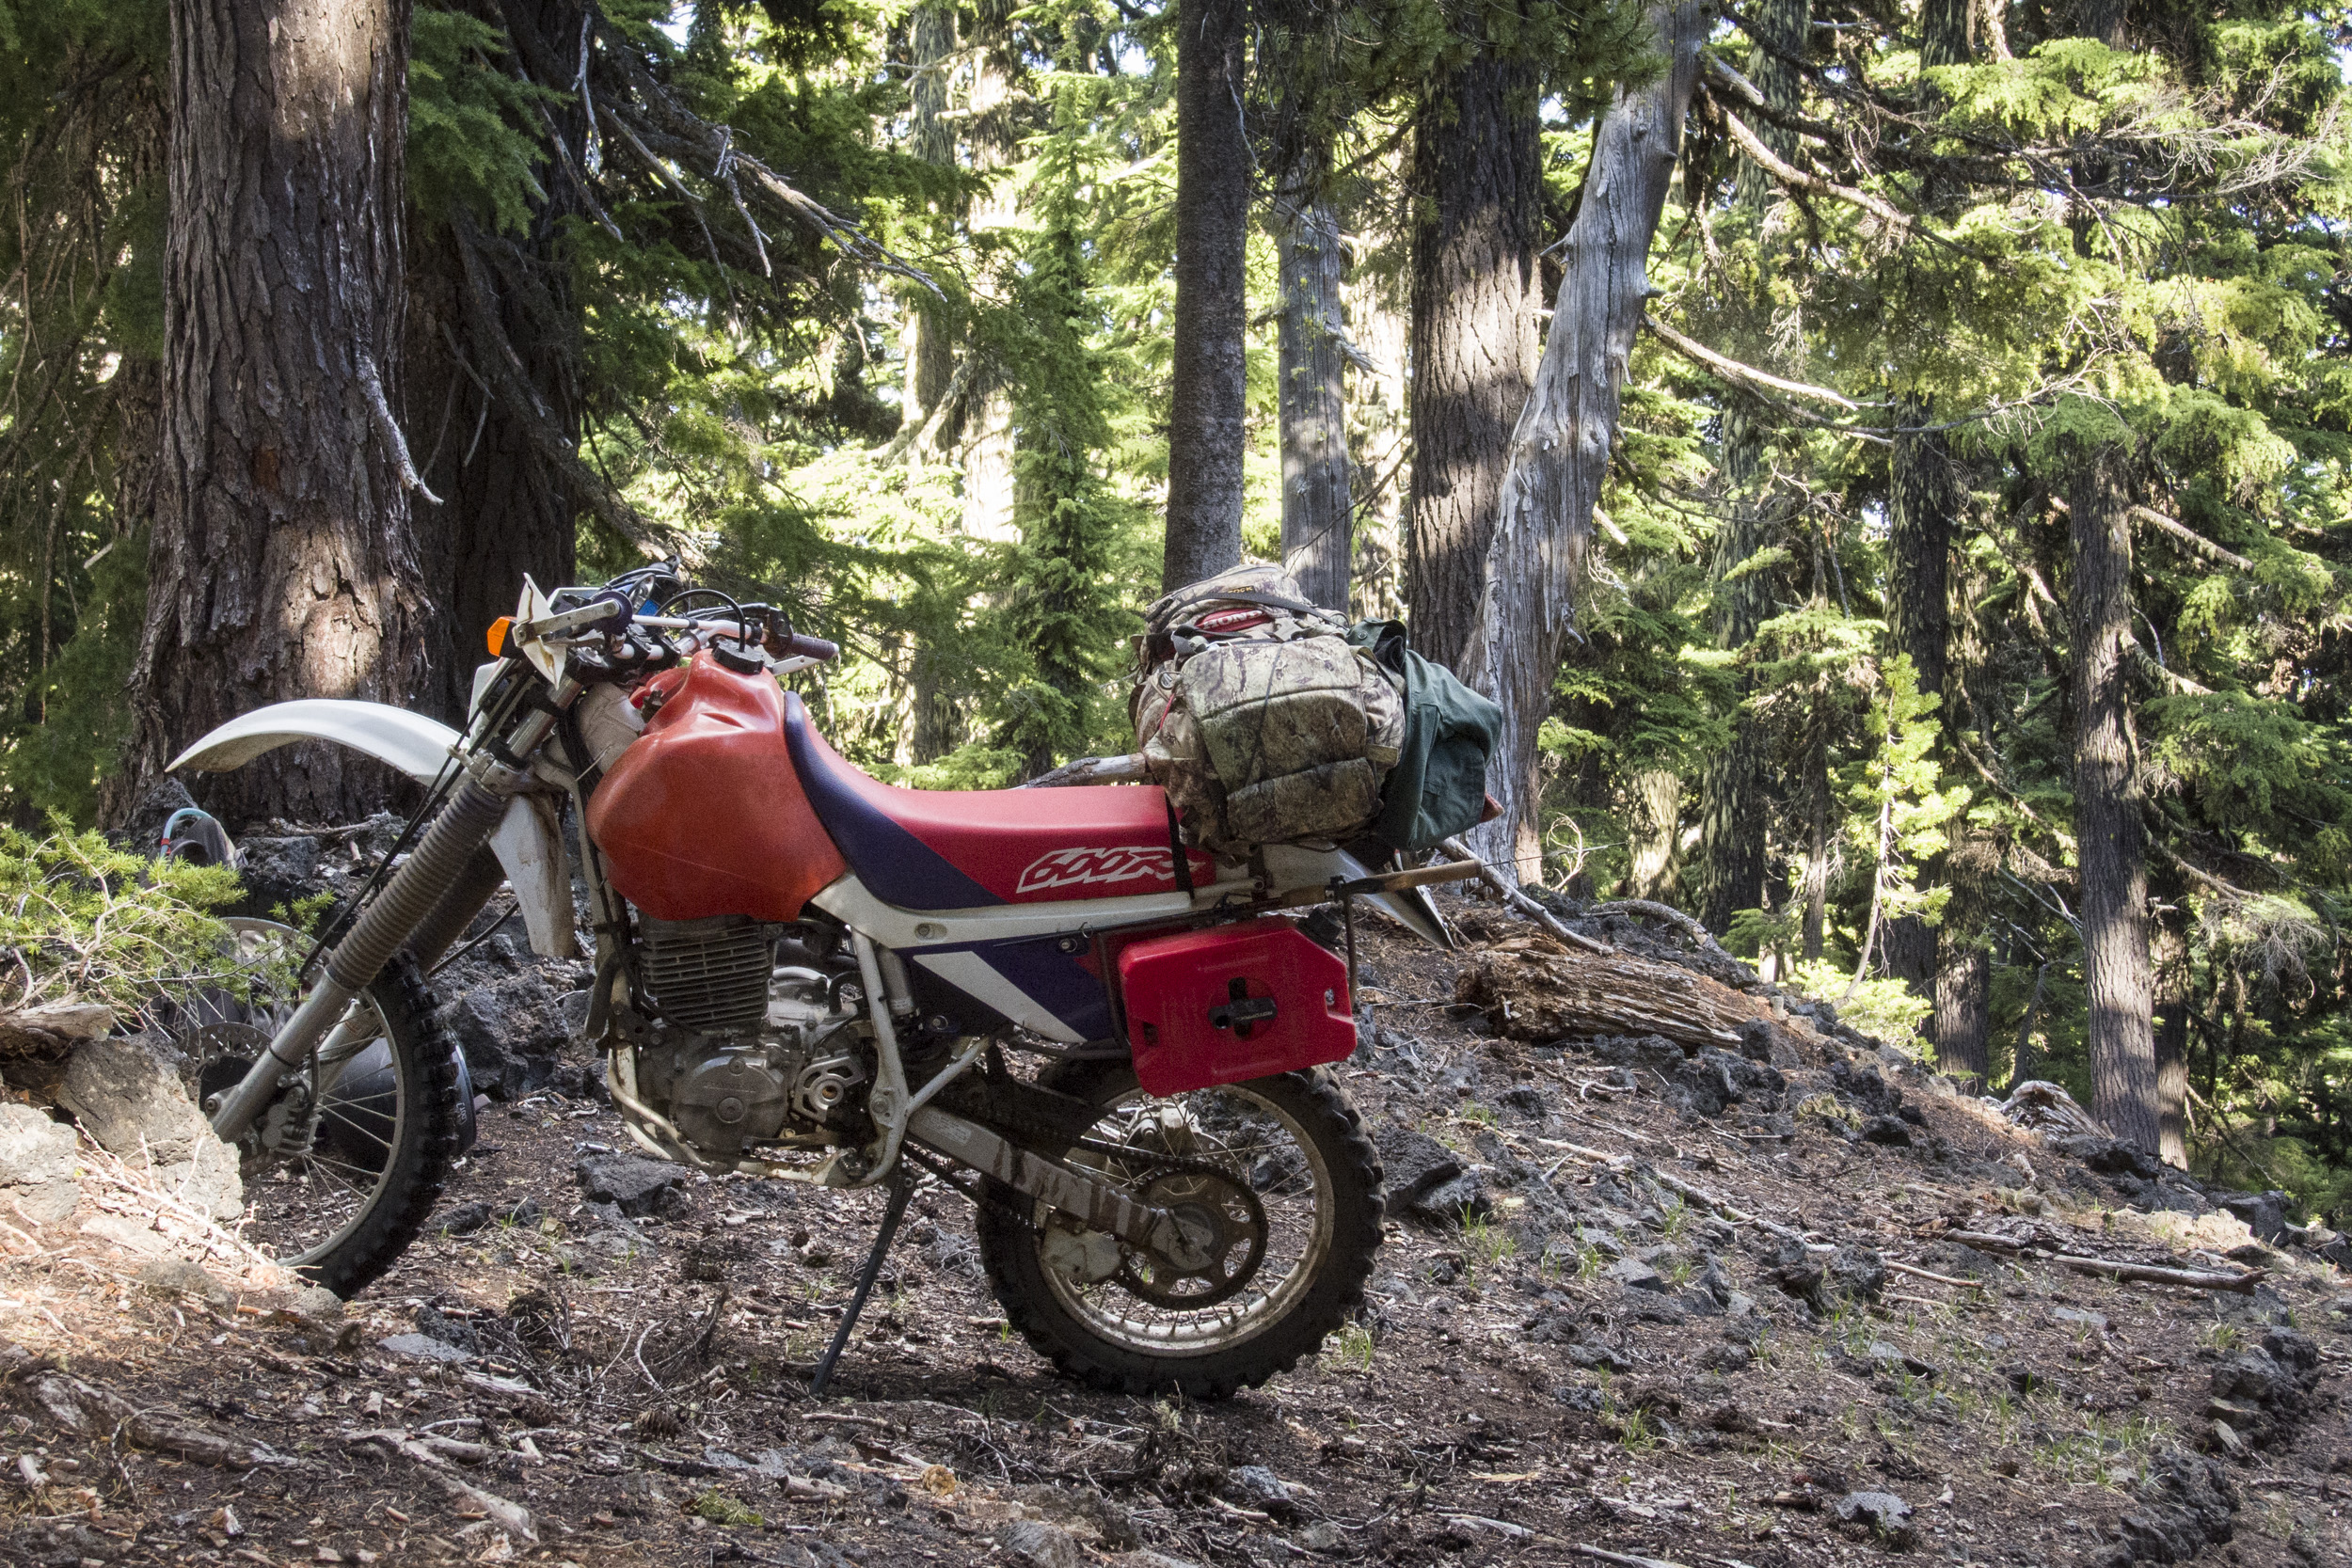 Multi day moto camping through the mountains of Central Oregon with Dave Reuss